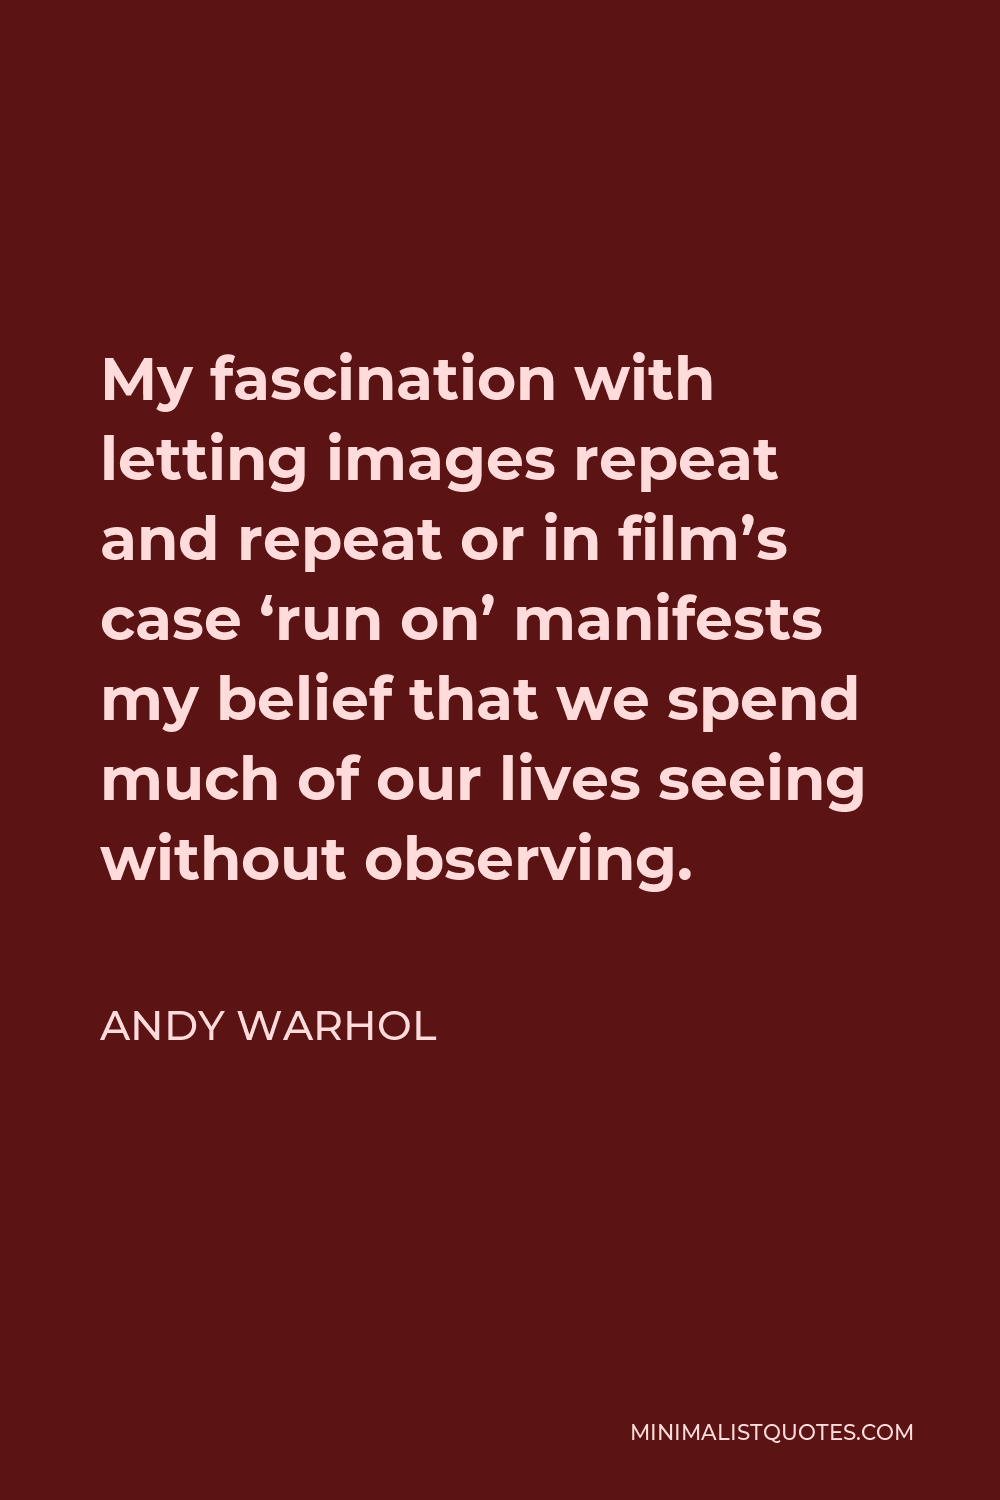 Andy Warhol Quote - My fascination with letting images repeat and repeat or in film’s case ‘run on’ manifests my belief that we spend much of our lives seeing without observing.